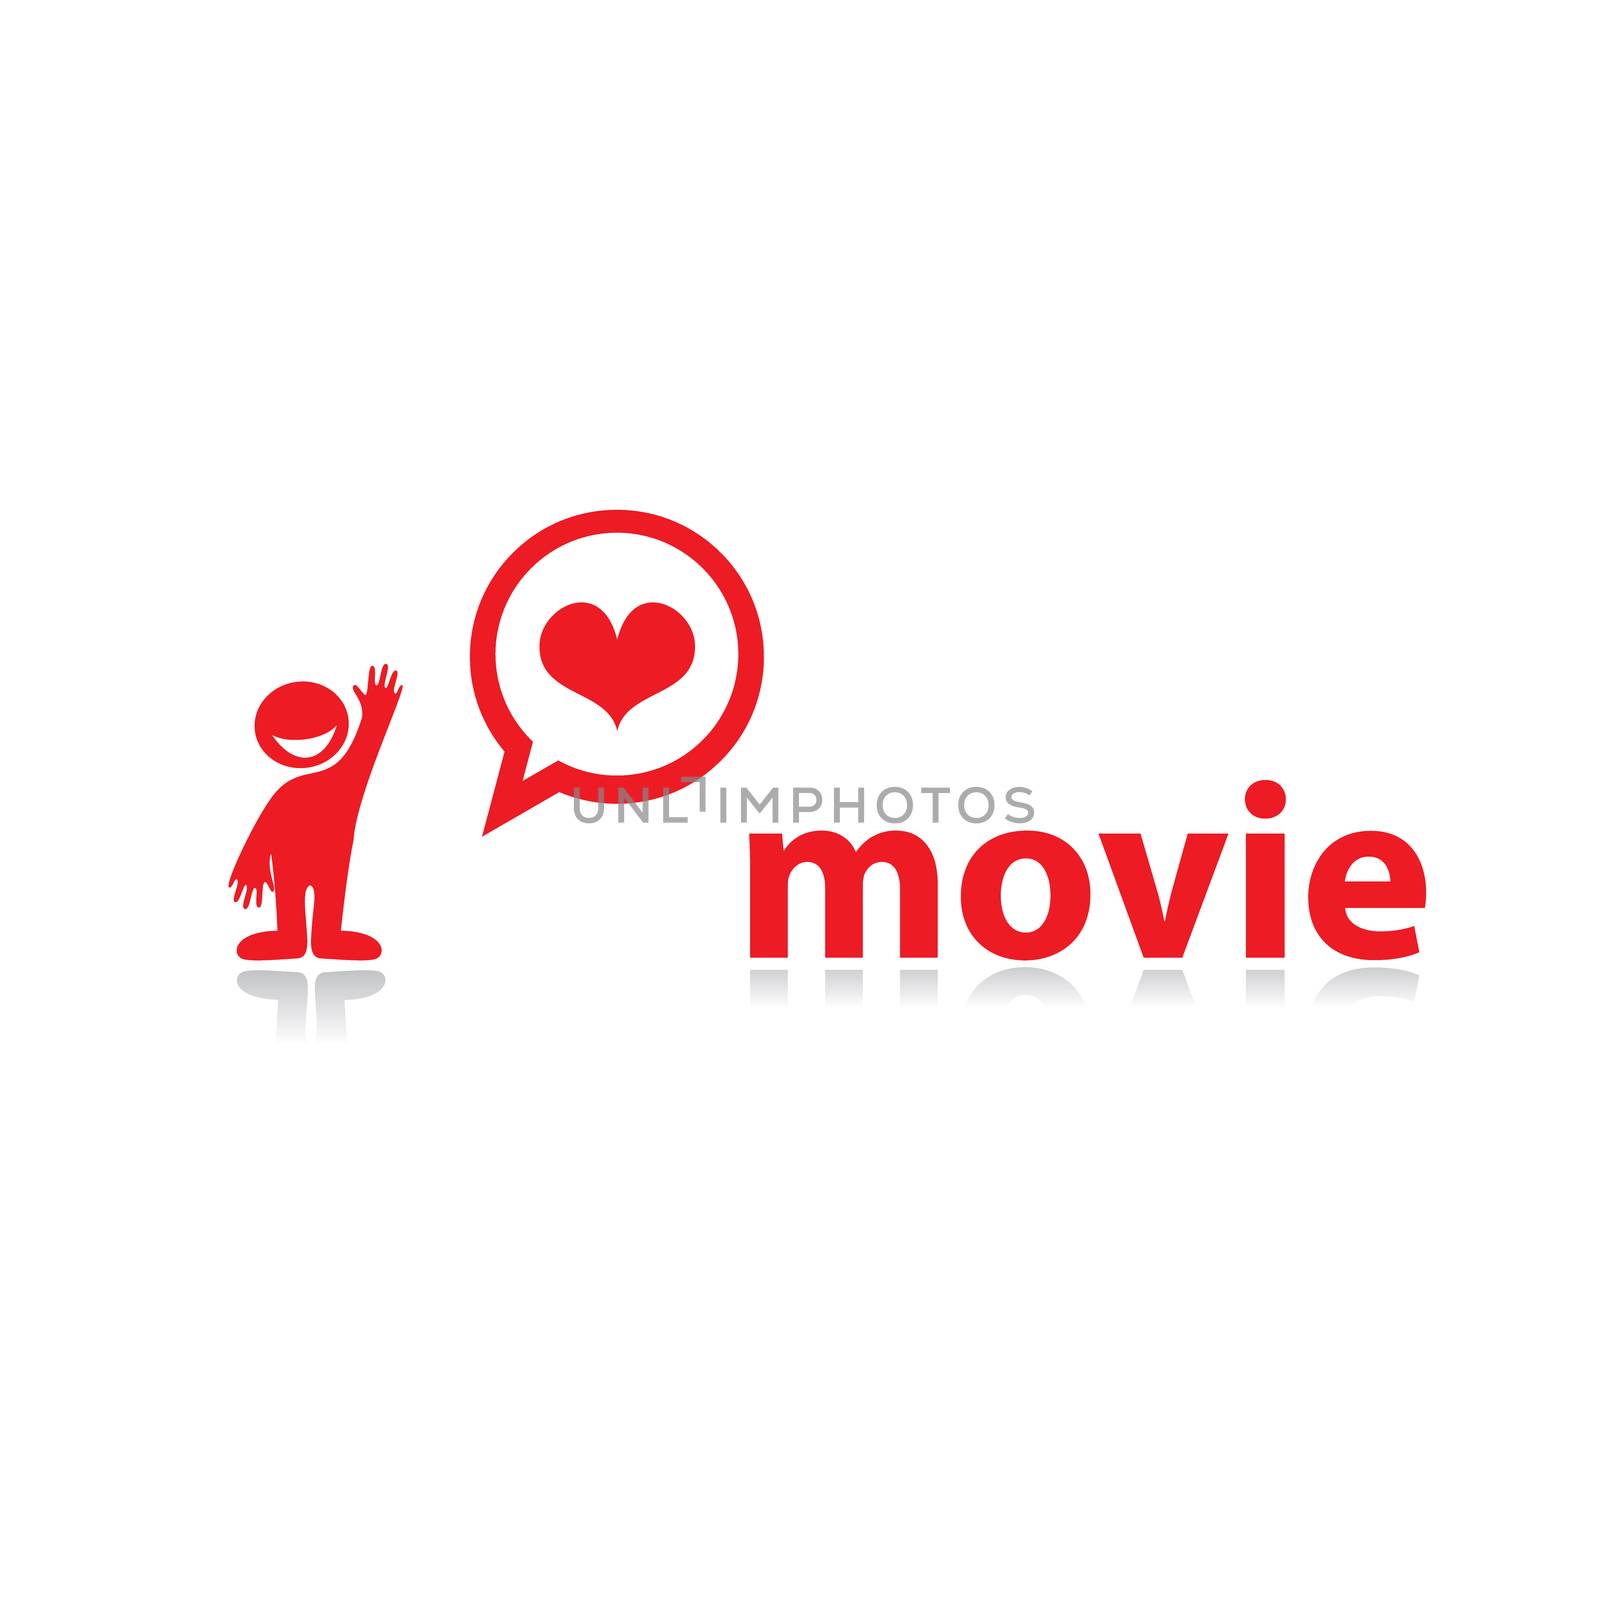 I love movies! Template for design.